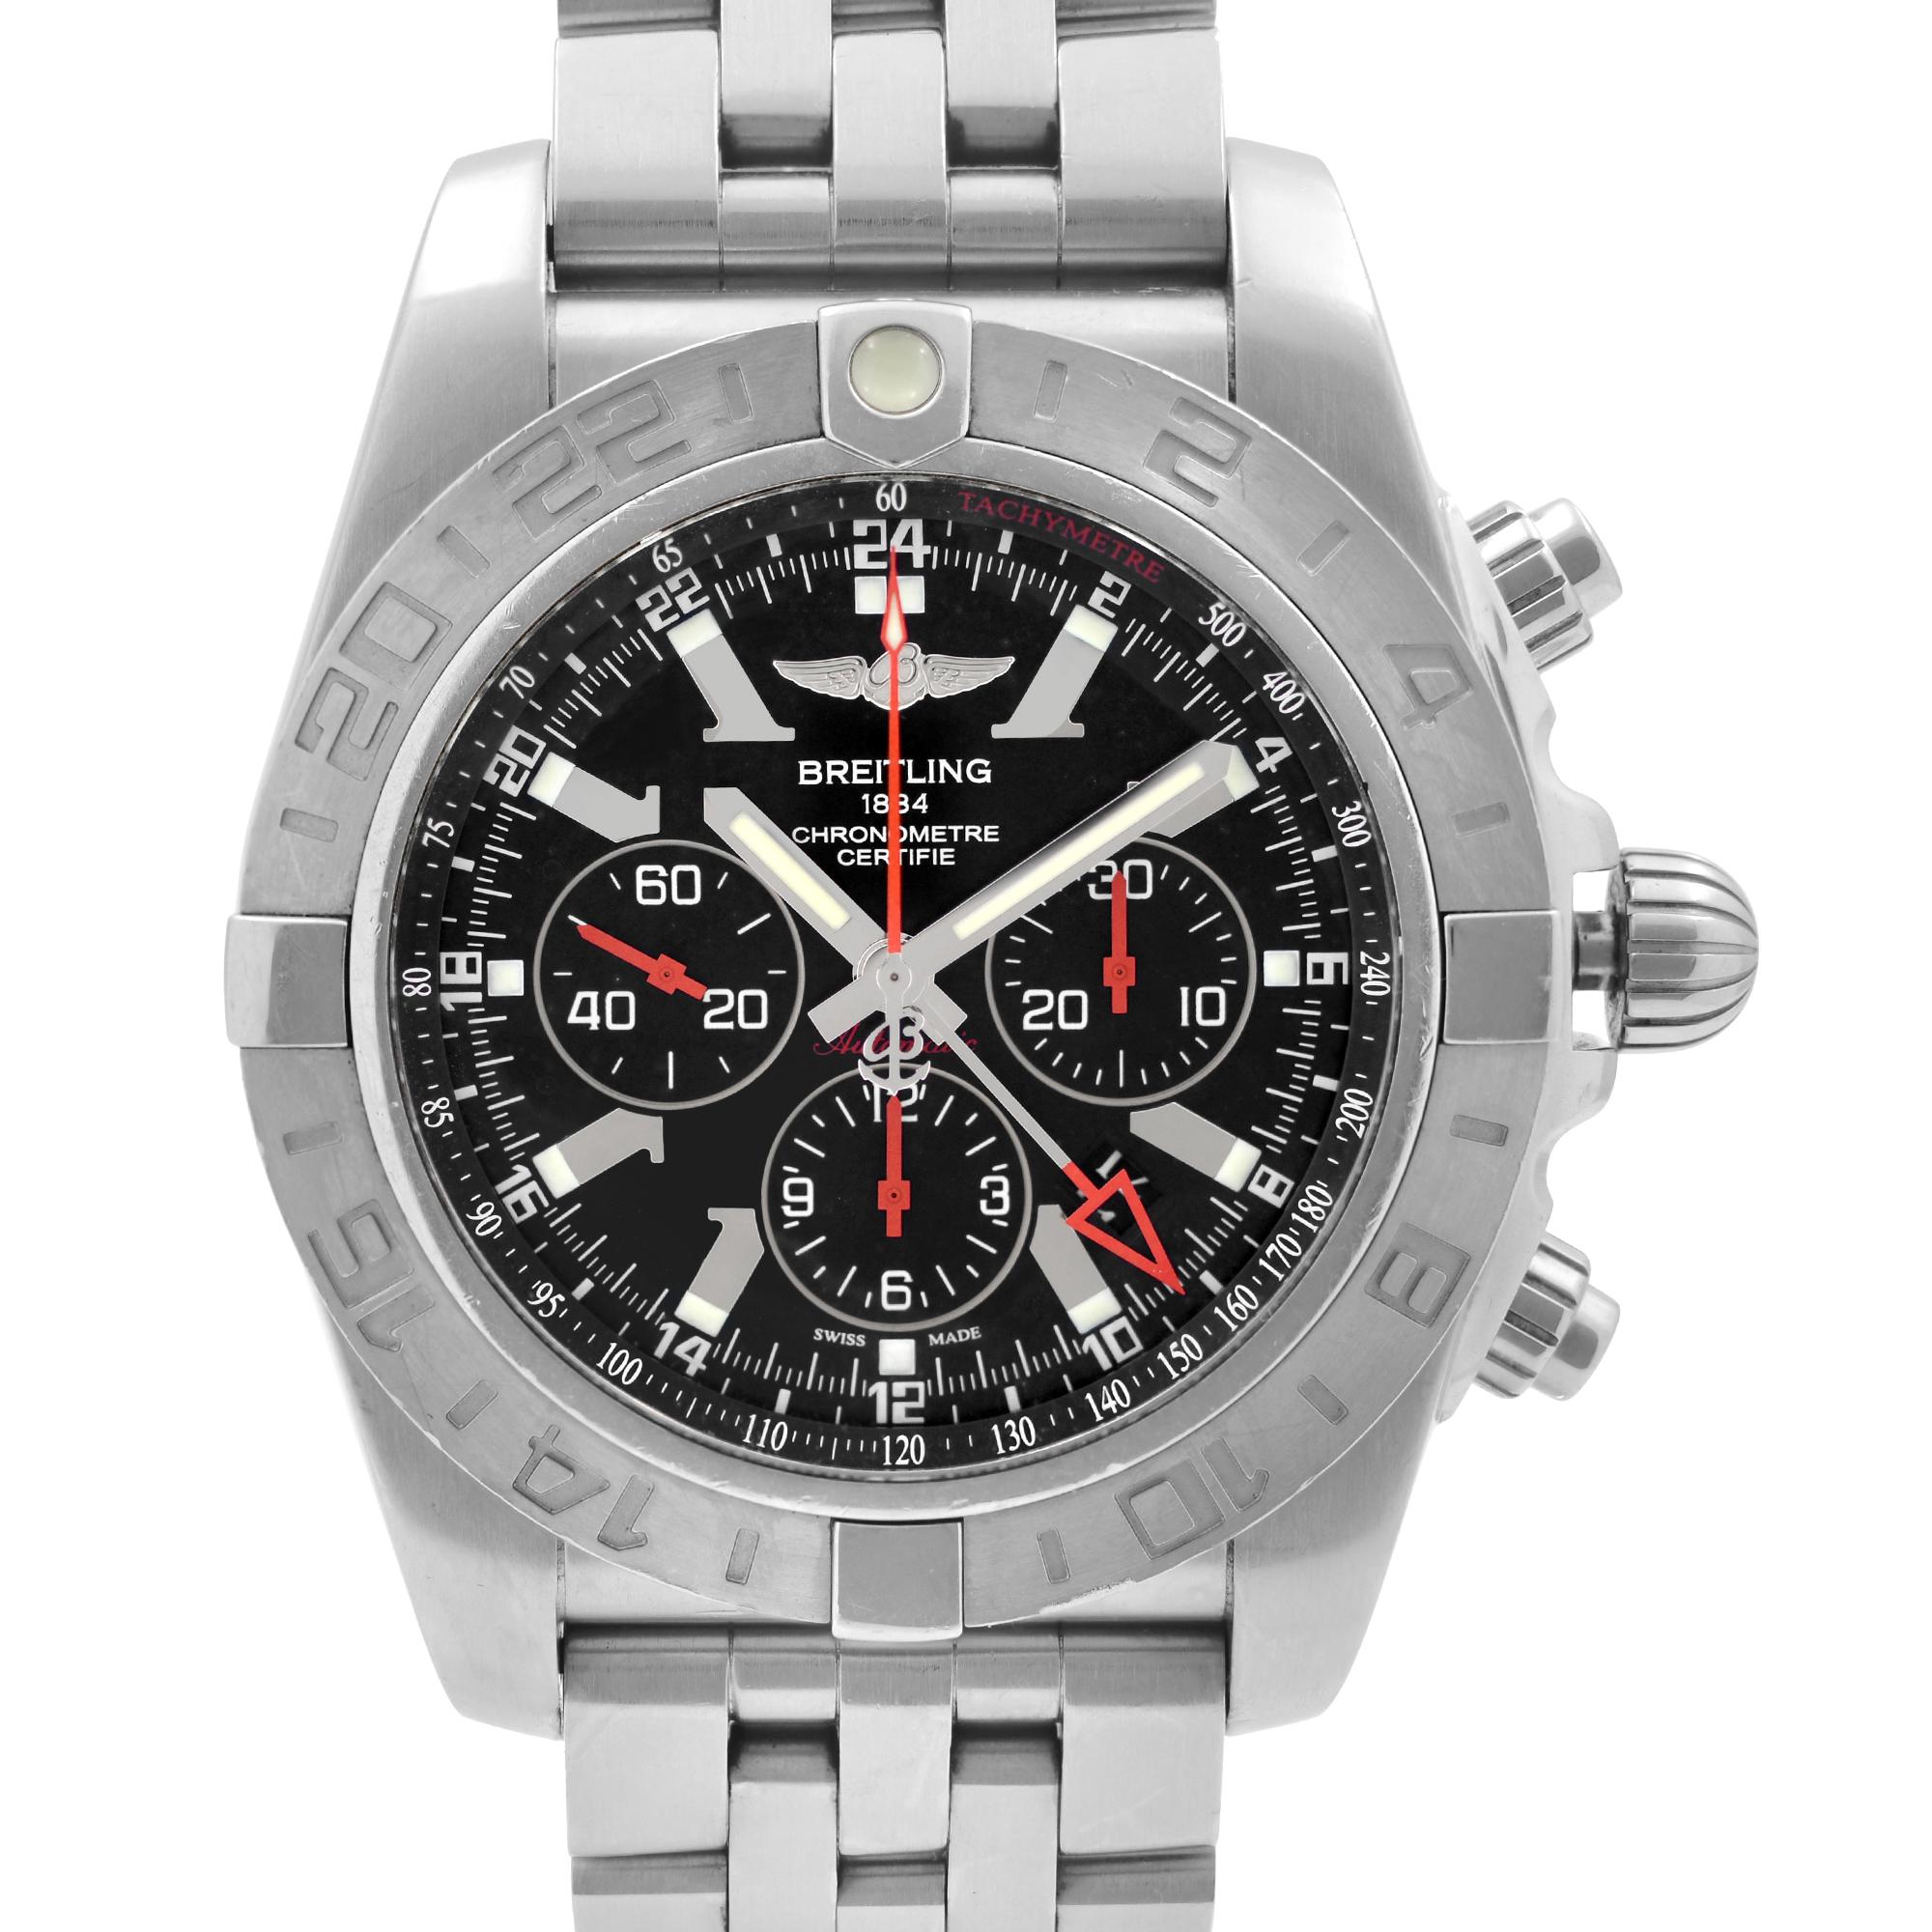 Pre Owned Breitling Chronomat GMT Limited Steel Swiss Automatic Men's Watch AB0412. Micro Scratches And Blemishes on the Bezel and Case, The Band on this Watch Show Some Wear. Comes with Extra Links. This Timepiece Features: Stainless Steel Case &